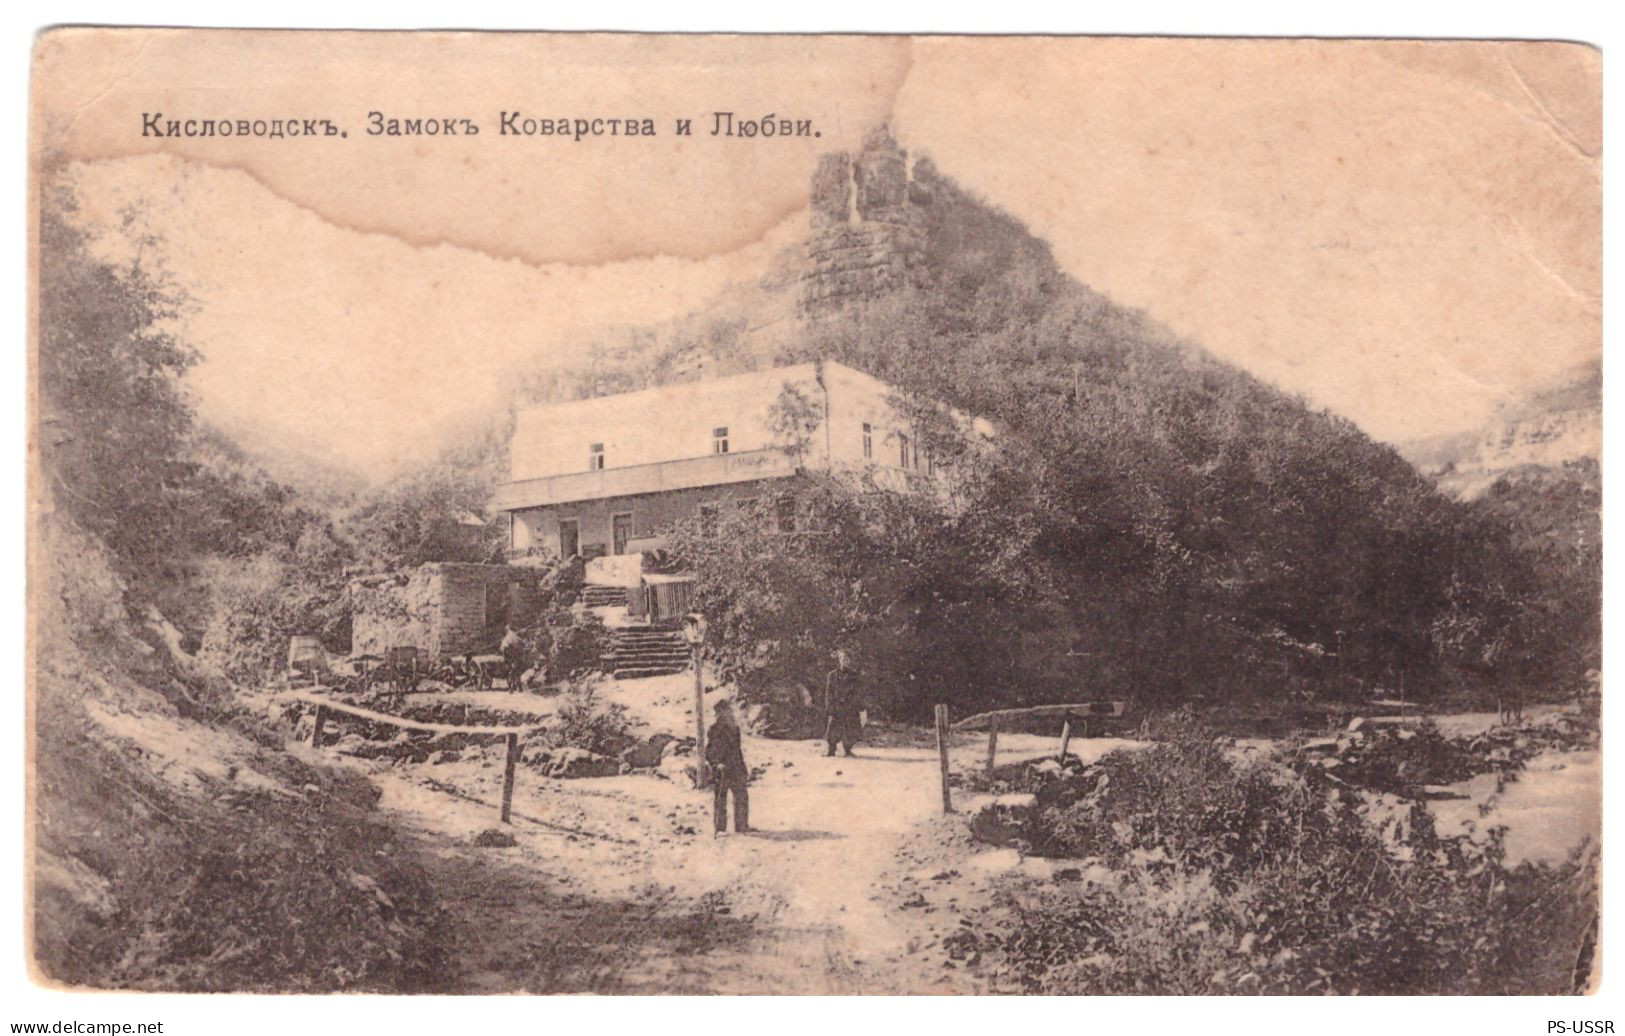 RUSSIA  Before 1940 KISLOVODSK CASTLE OF LOVE AND DECEIT POSTCARD UNUSED - Russie